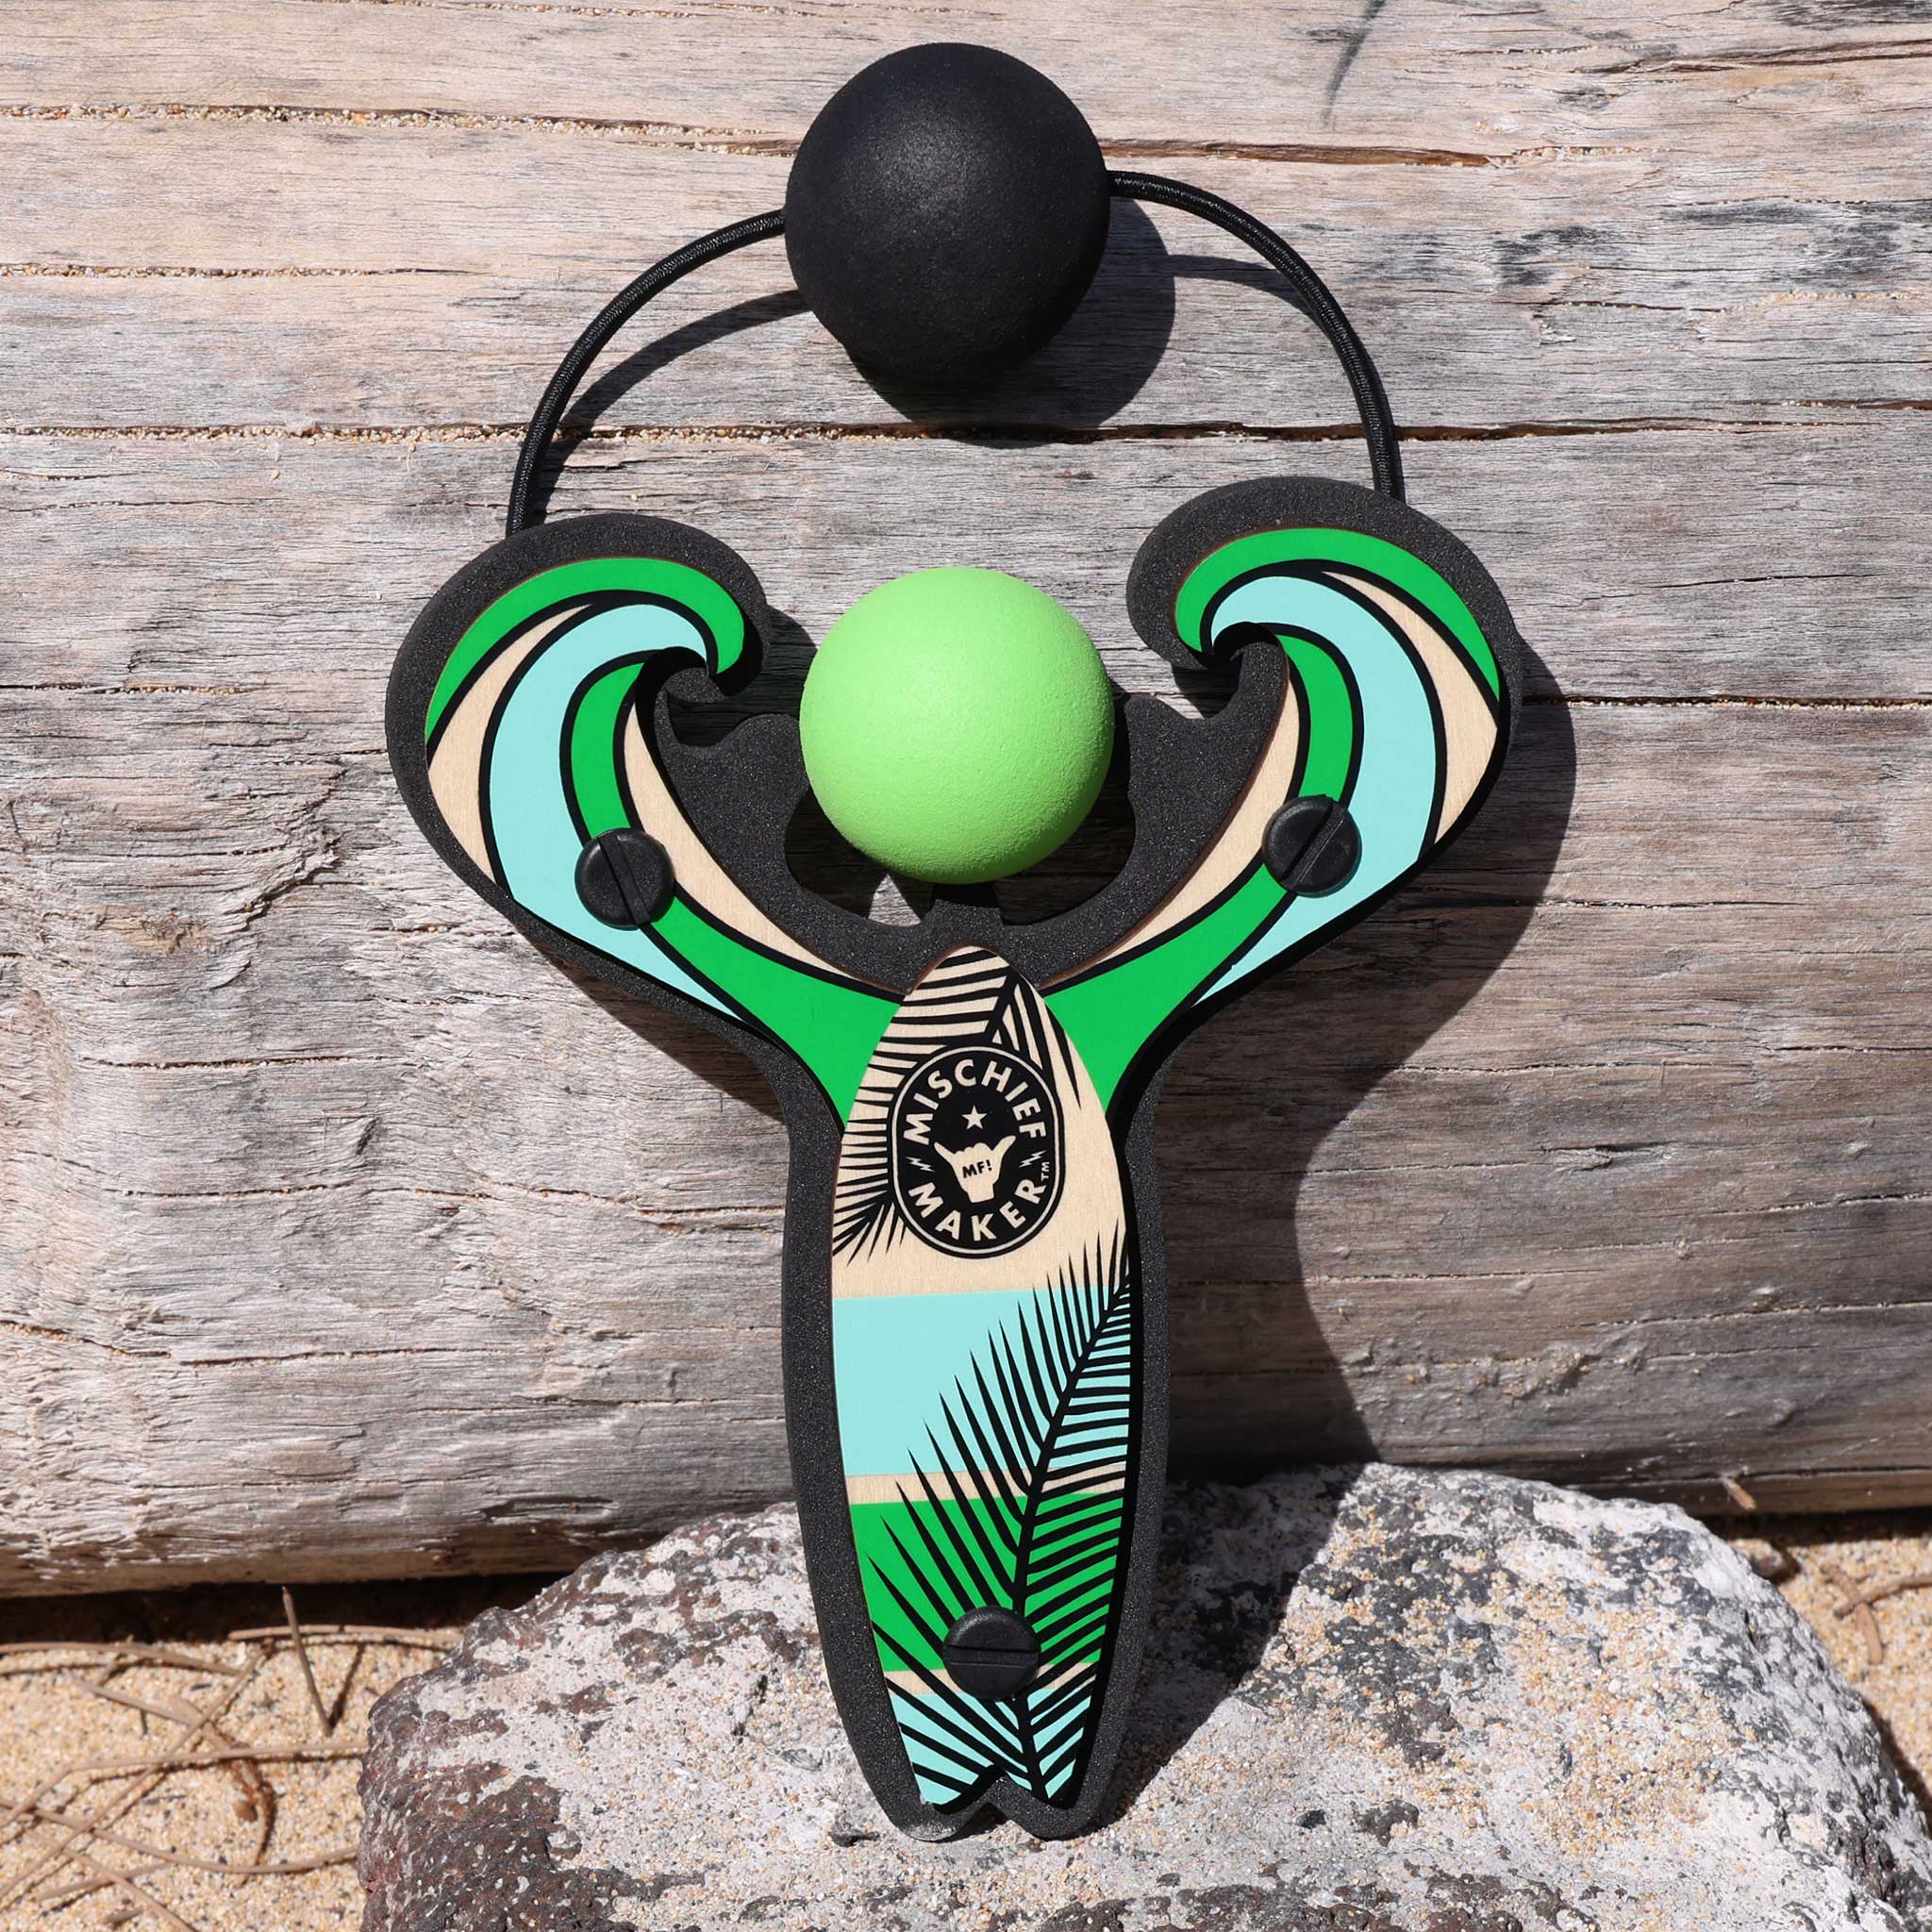 Green Surf’s Up toy slingshot with ball foam ball by the ocean. Mischief Maker by Mighty Fun!